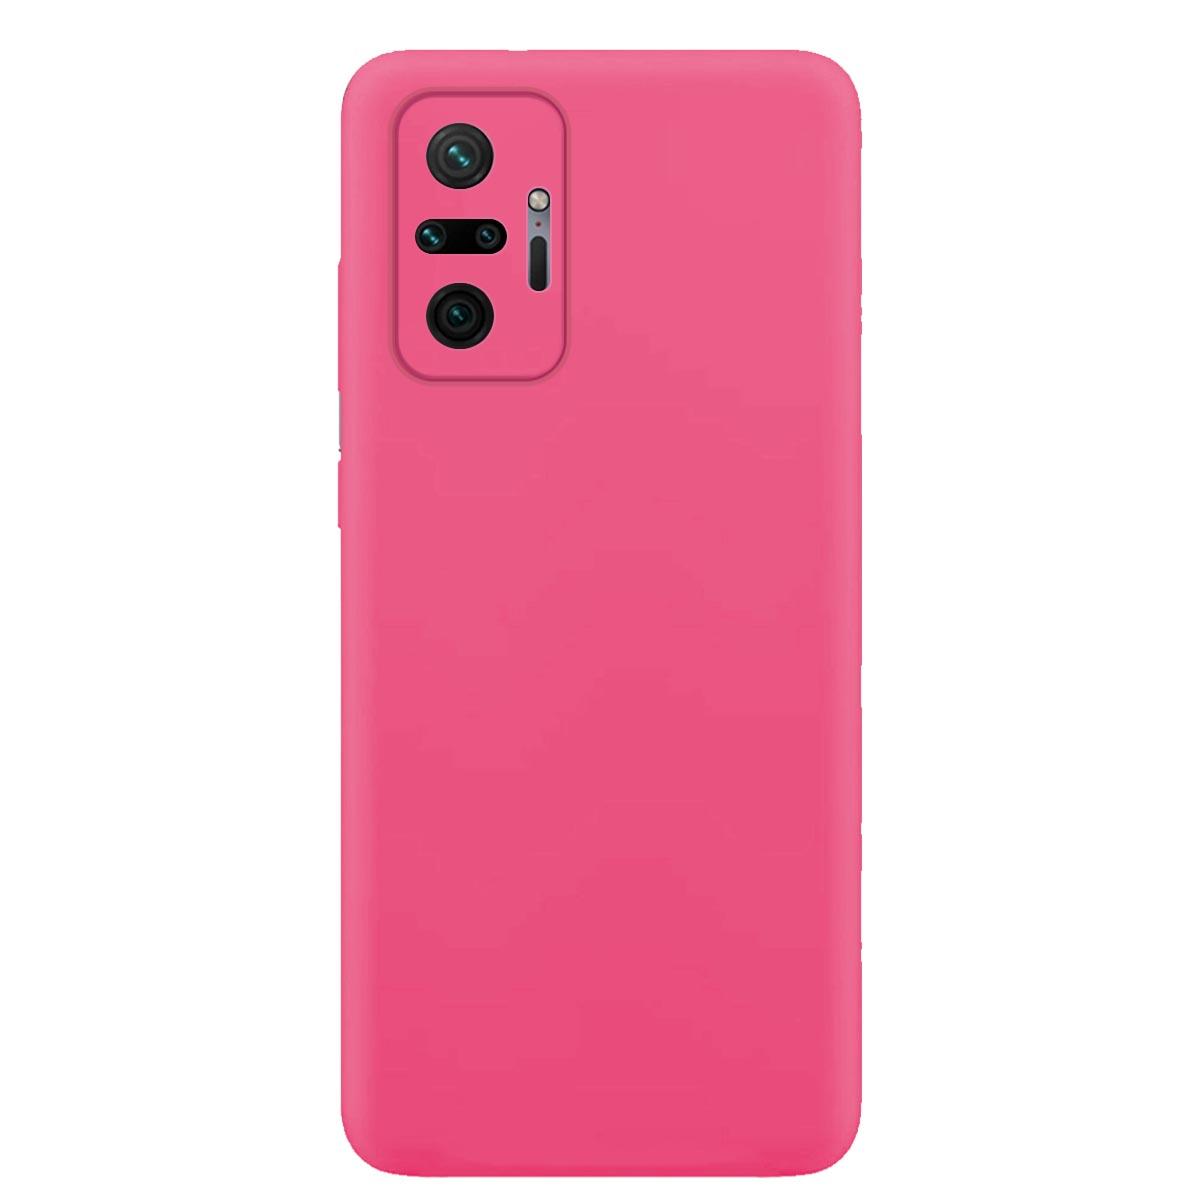 MTB MORE Note Pro, Pro Note Case, Pink Redmi ENERGY Backcover, 10 Hot Redmi 10 Xiaomi, Soft Max, Silikon